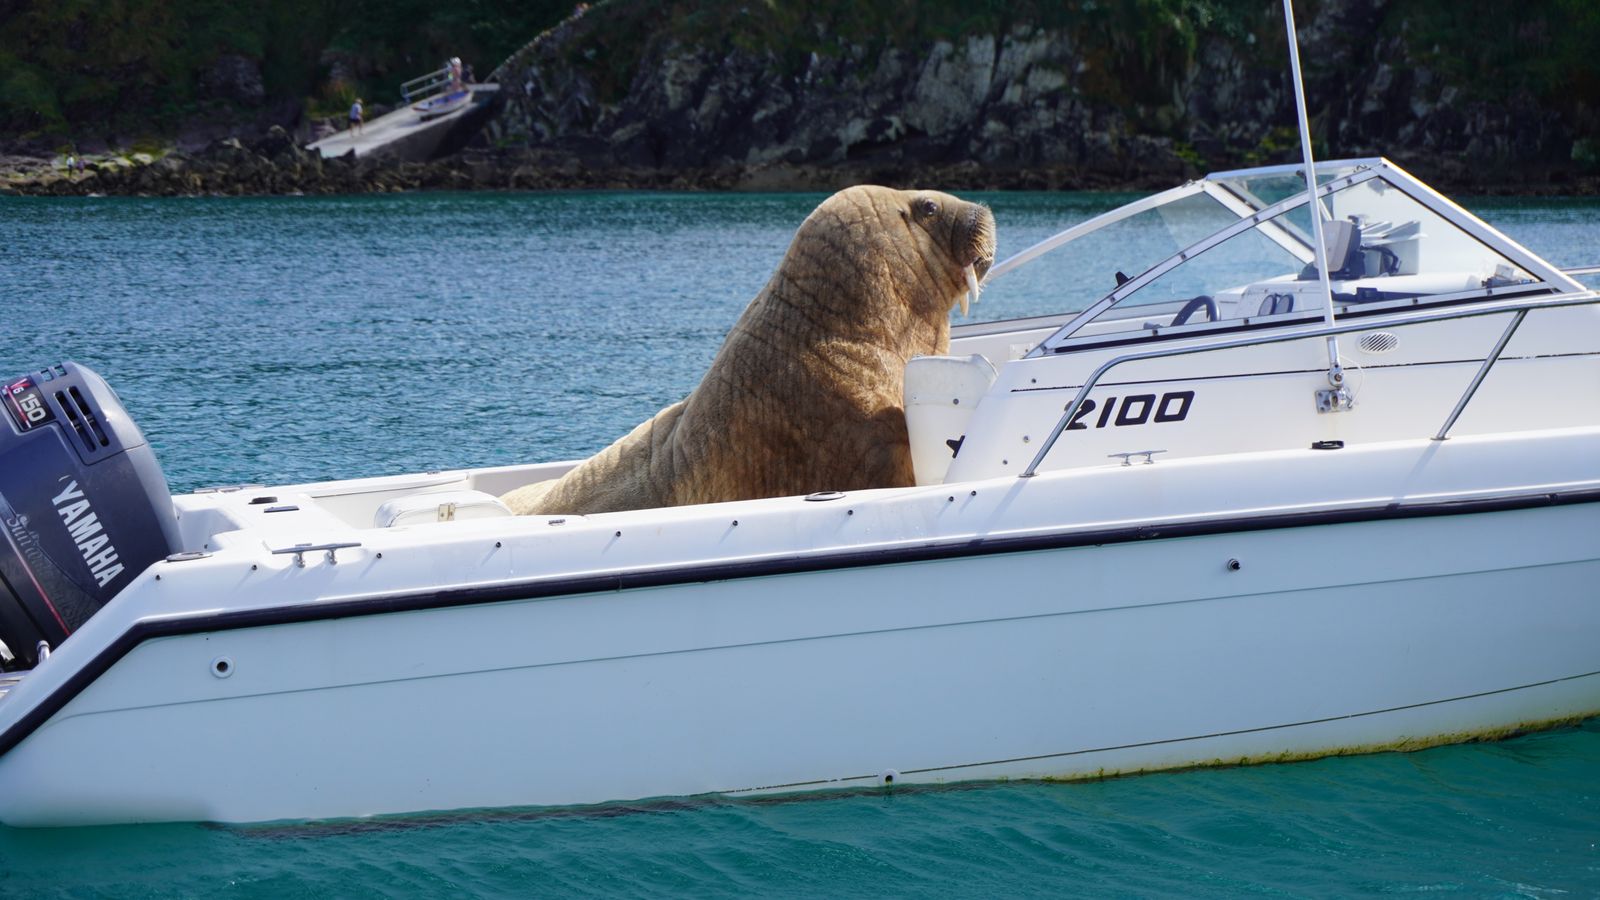 Wally the wandering walrus sets up home on a motorboat